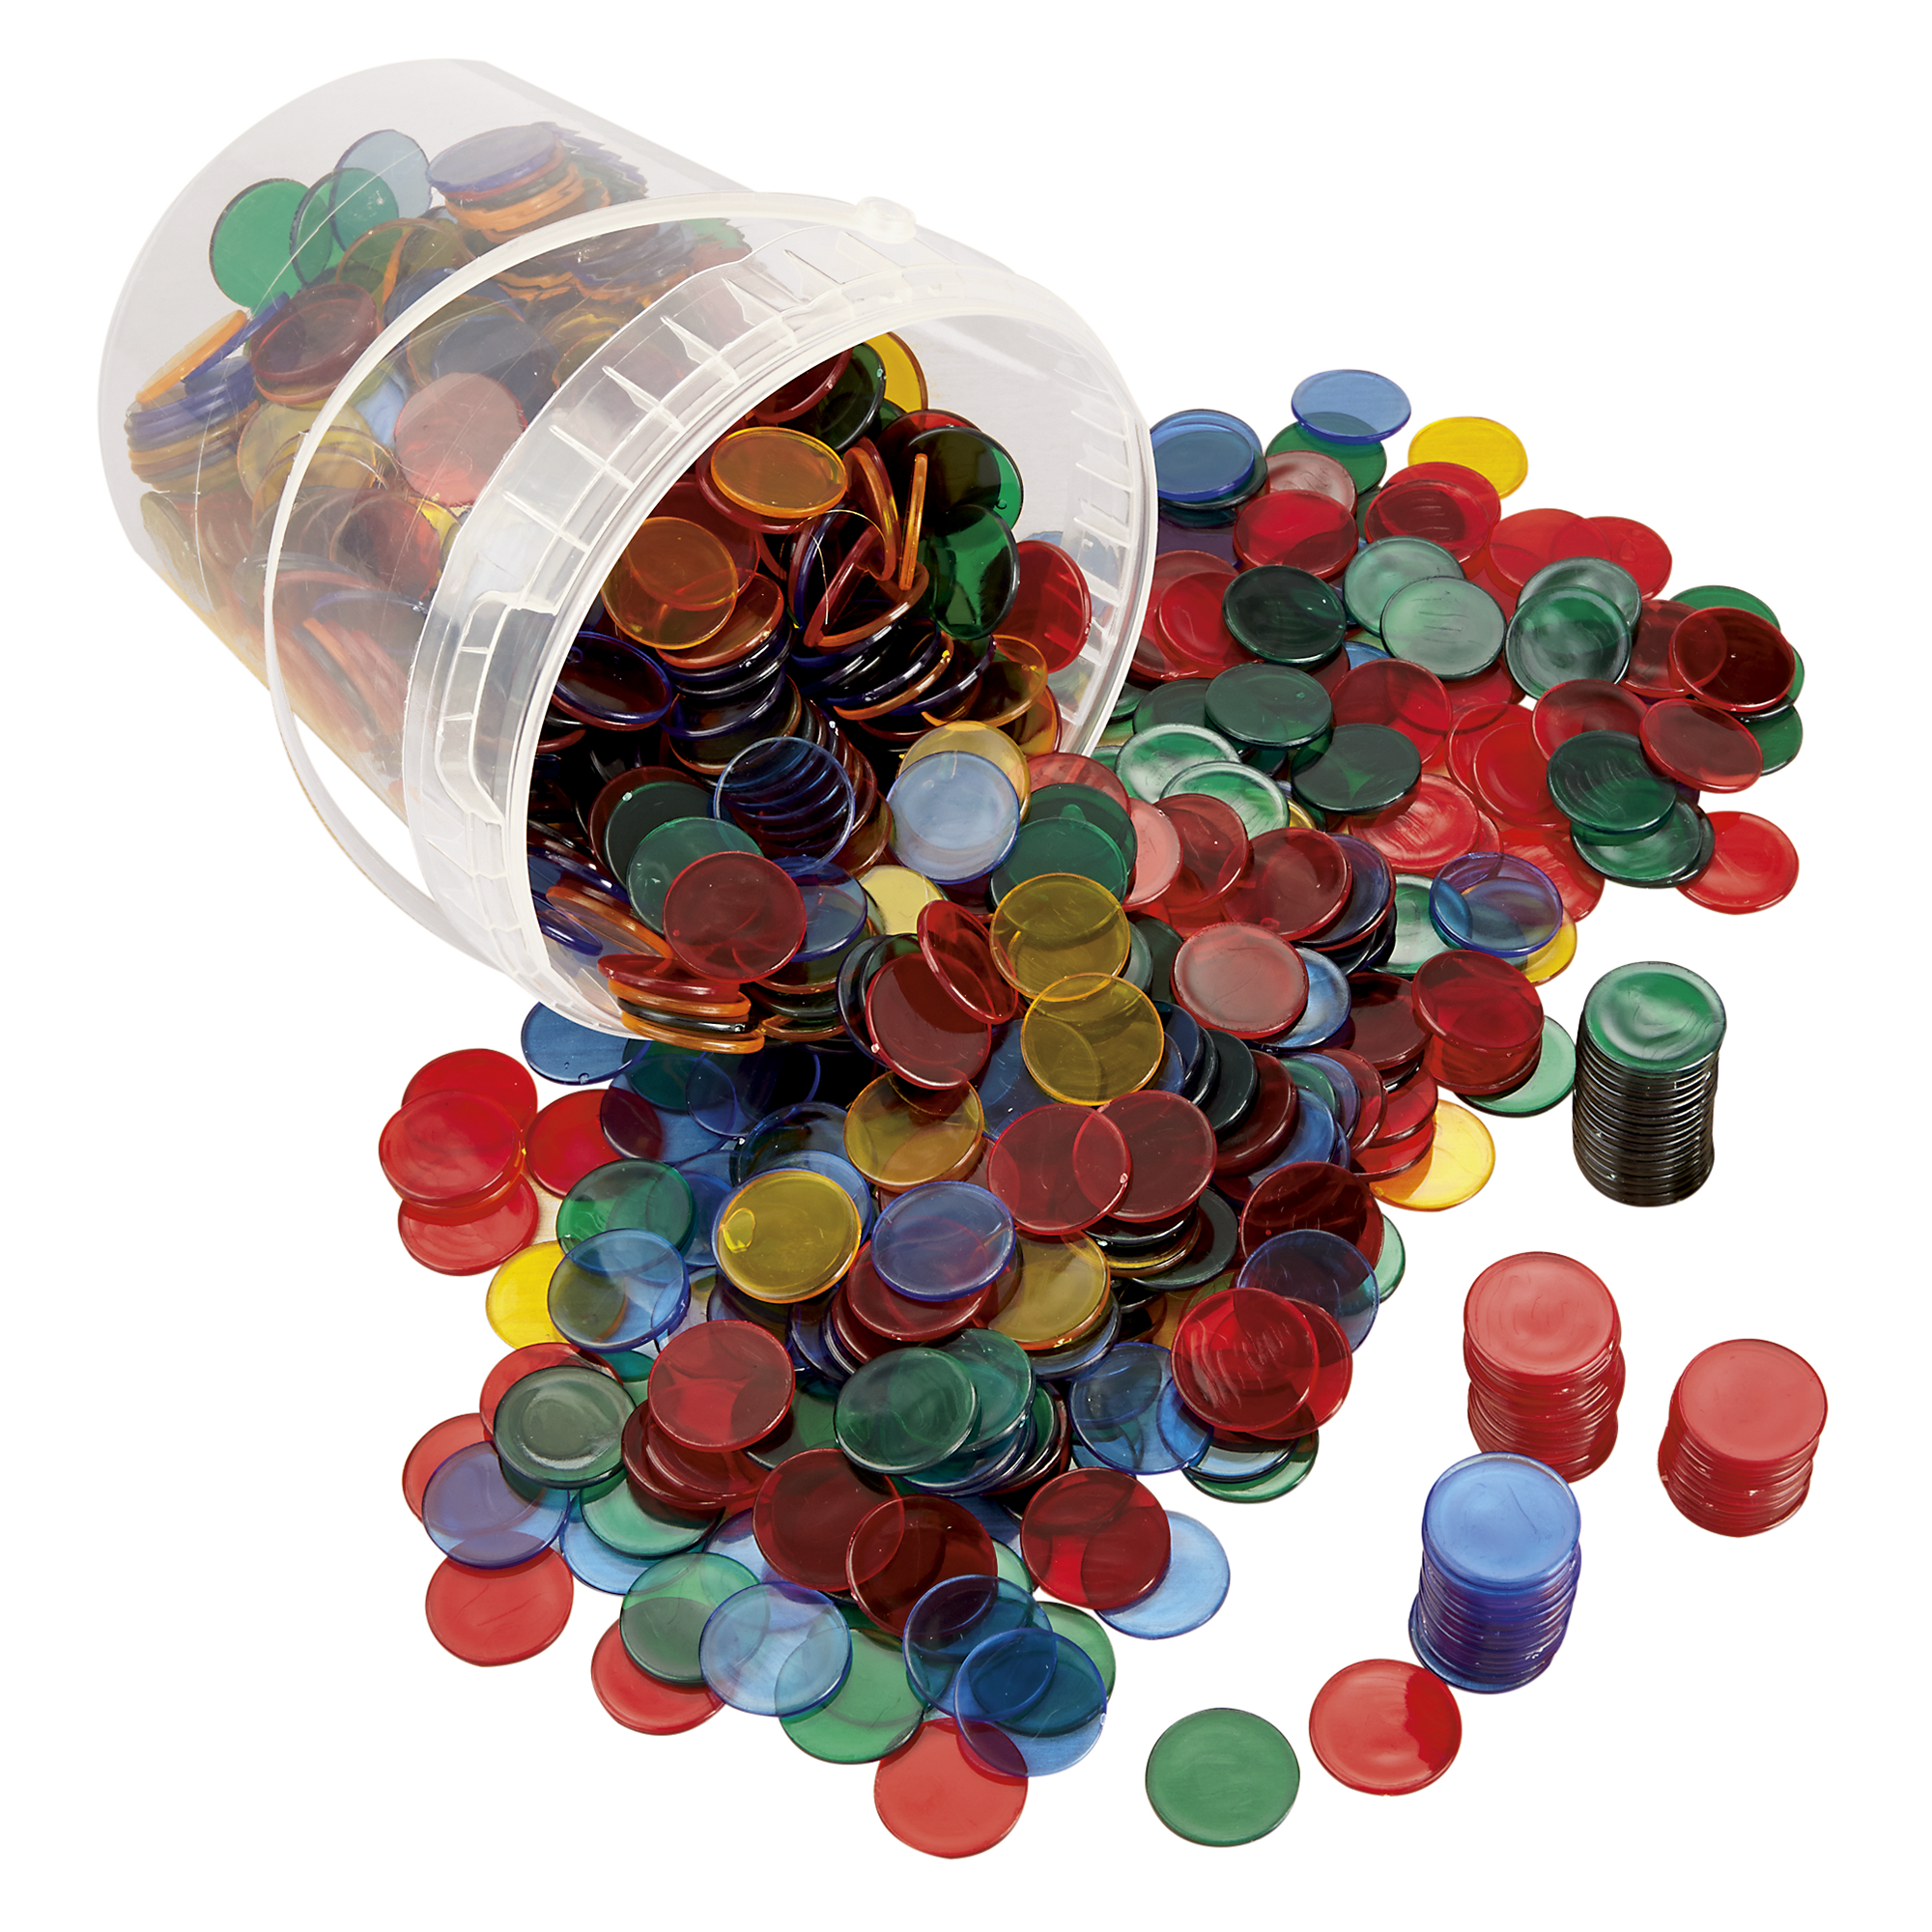 Education Resource for Counting & Sorting 100 piece Counters 22mm Transparent 